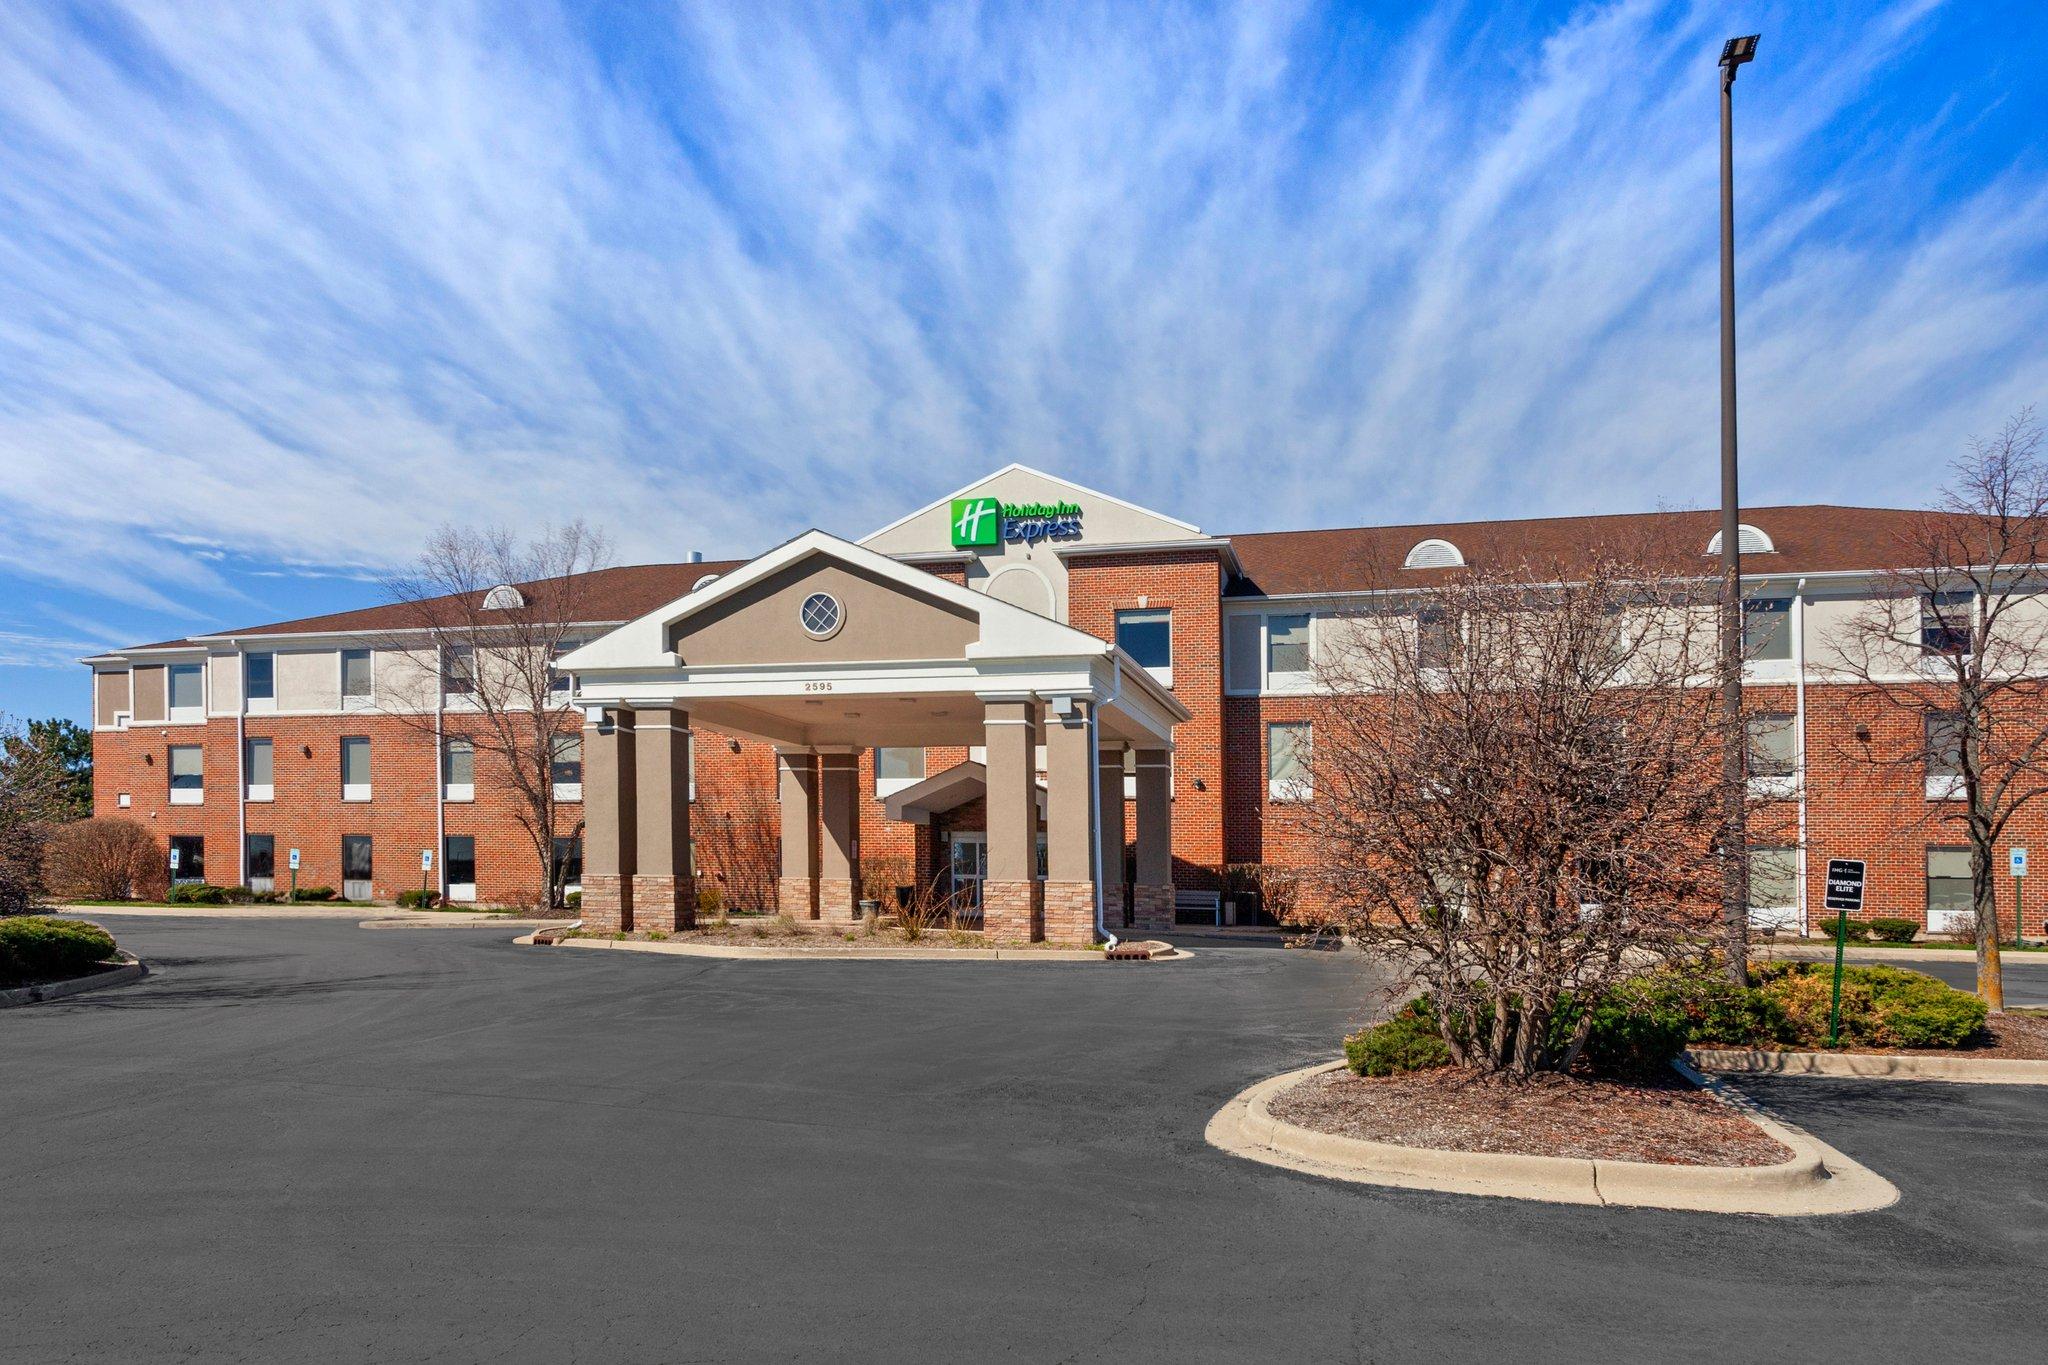 Holiday Inn Express Hotel & Suites Algonquin in Algonquin, IL